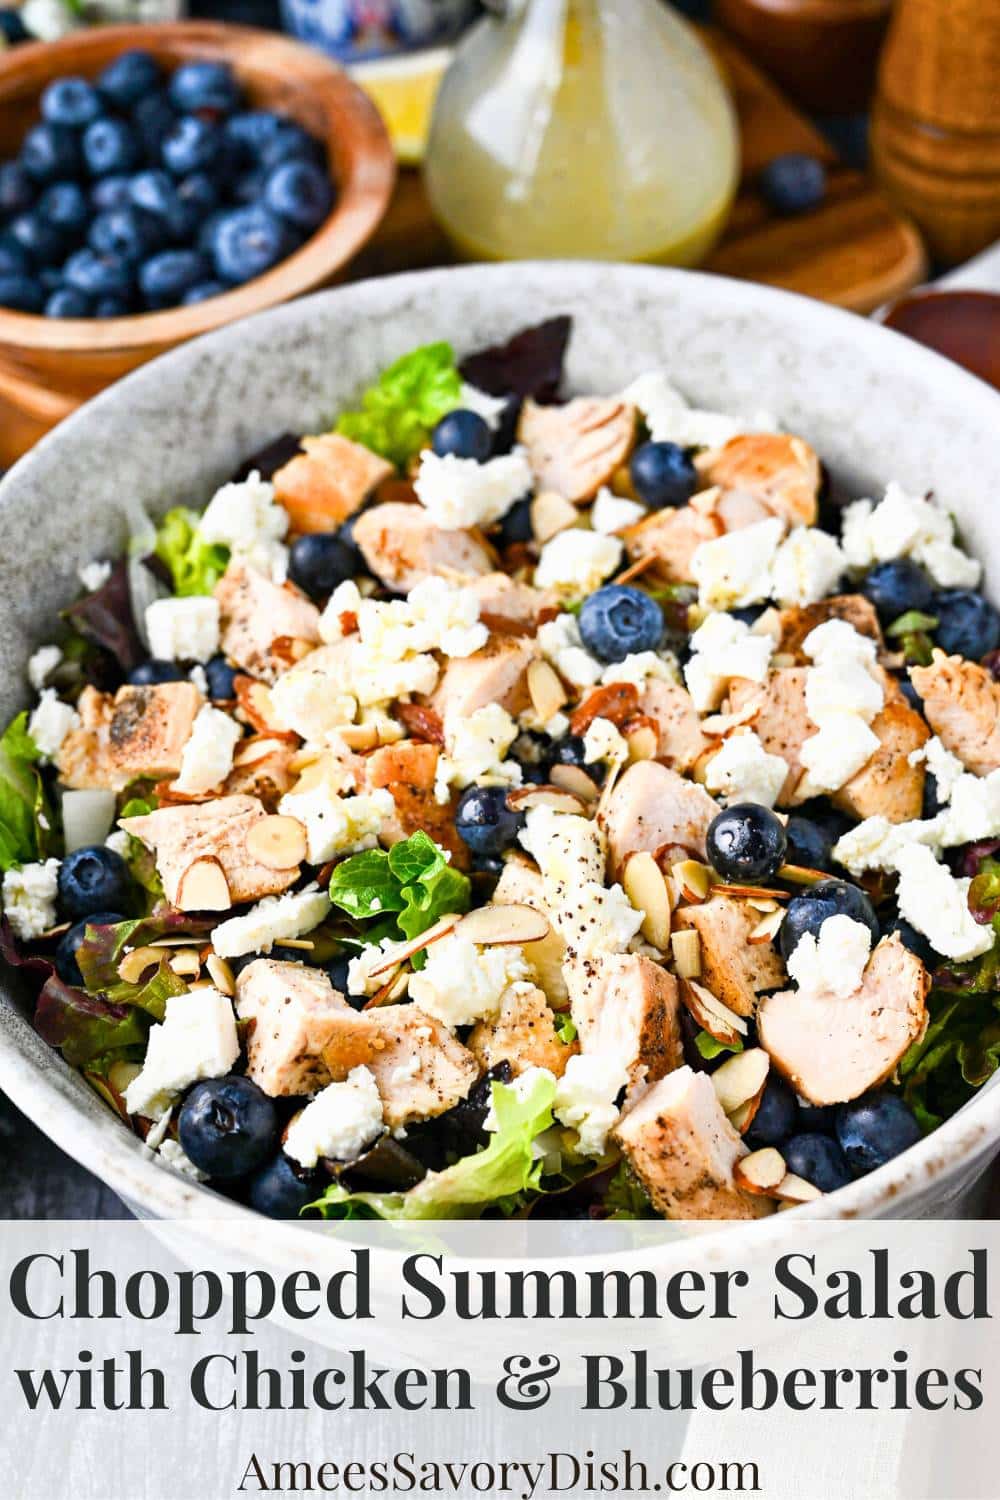 This sensational salad features crisp romaine, juicy blueberries, tangy feta, toasted almonds, and tender chicken, all tossed in a lemon poppyseed dressing. via @Ameessavorydish